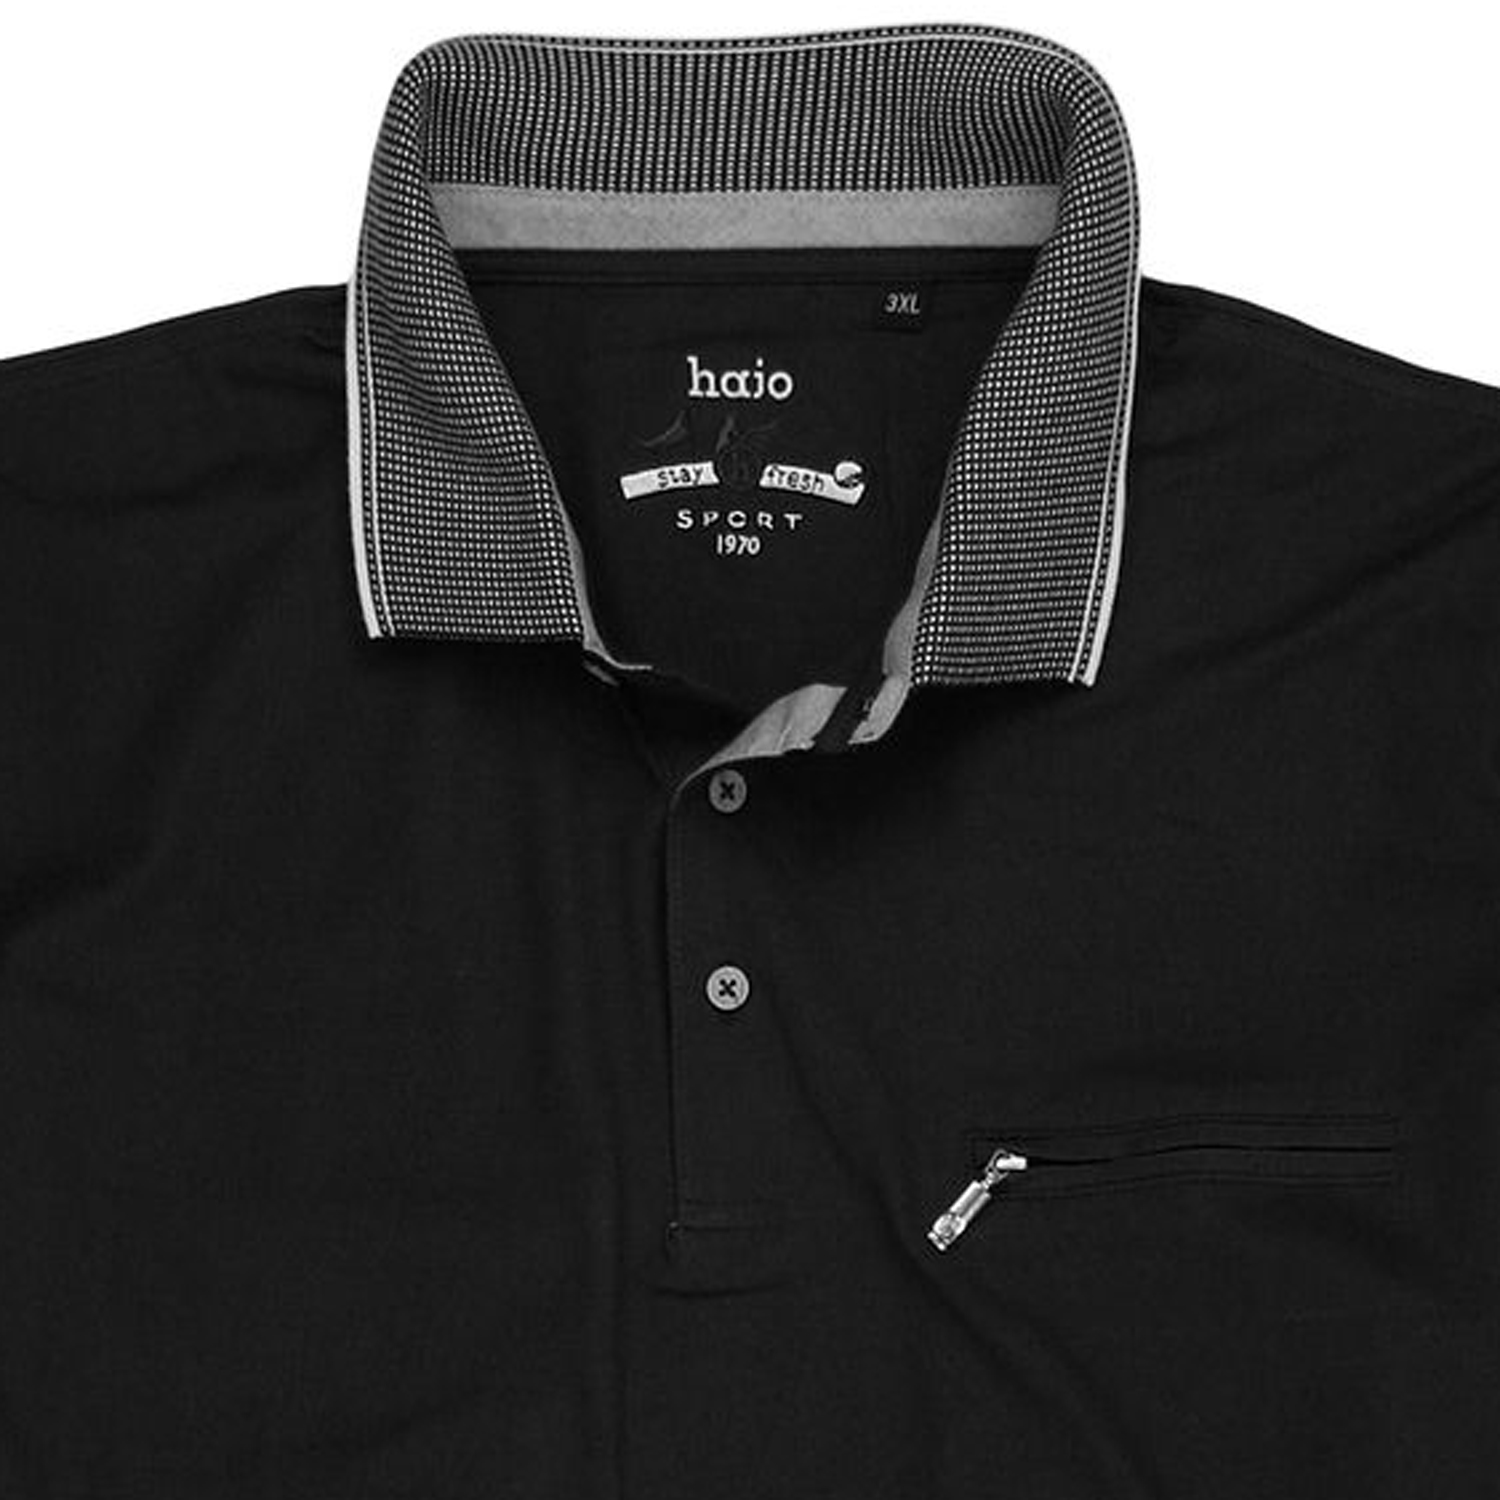 Polo shirt "stay fresh" for men by hajo in black up to oversize 6XL